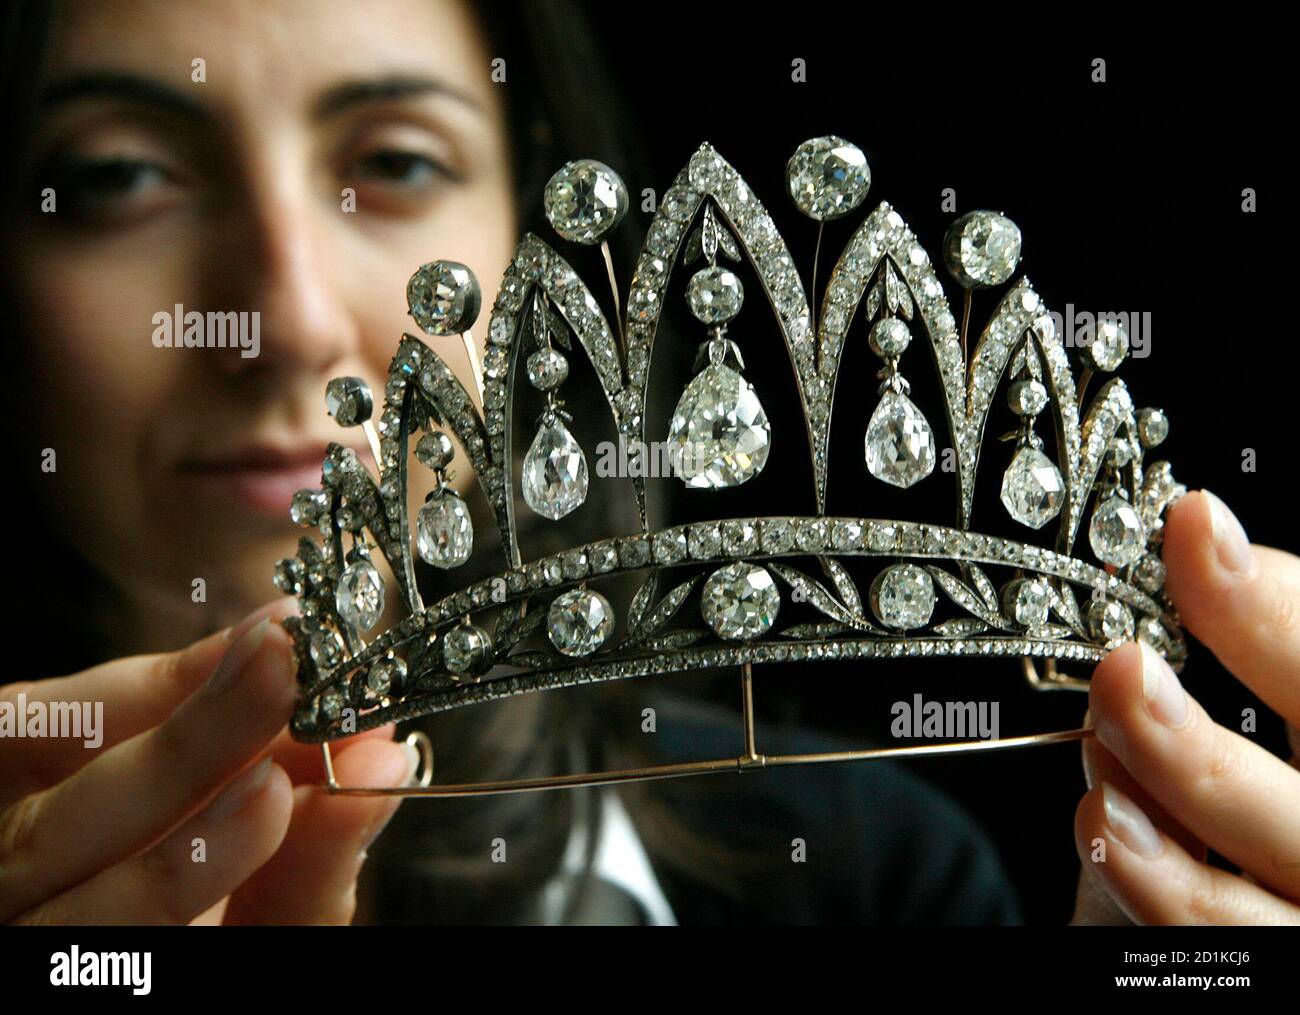 Christie's member of staff Carine Decroi displays an antique diamond tiara  (circa 1890) by Faberge during an auction preview in Geneva May 11, 2007.  This jewel, from the collection of Princess Maria